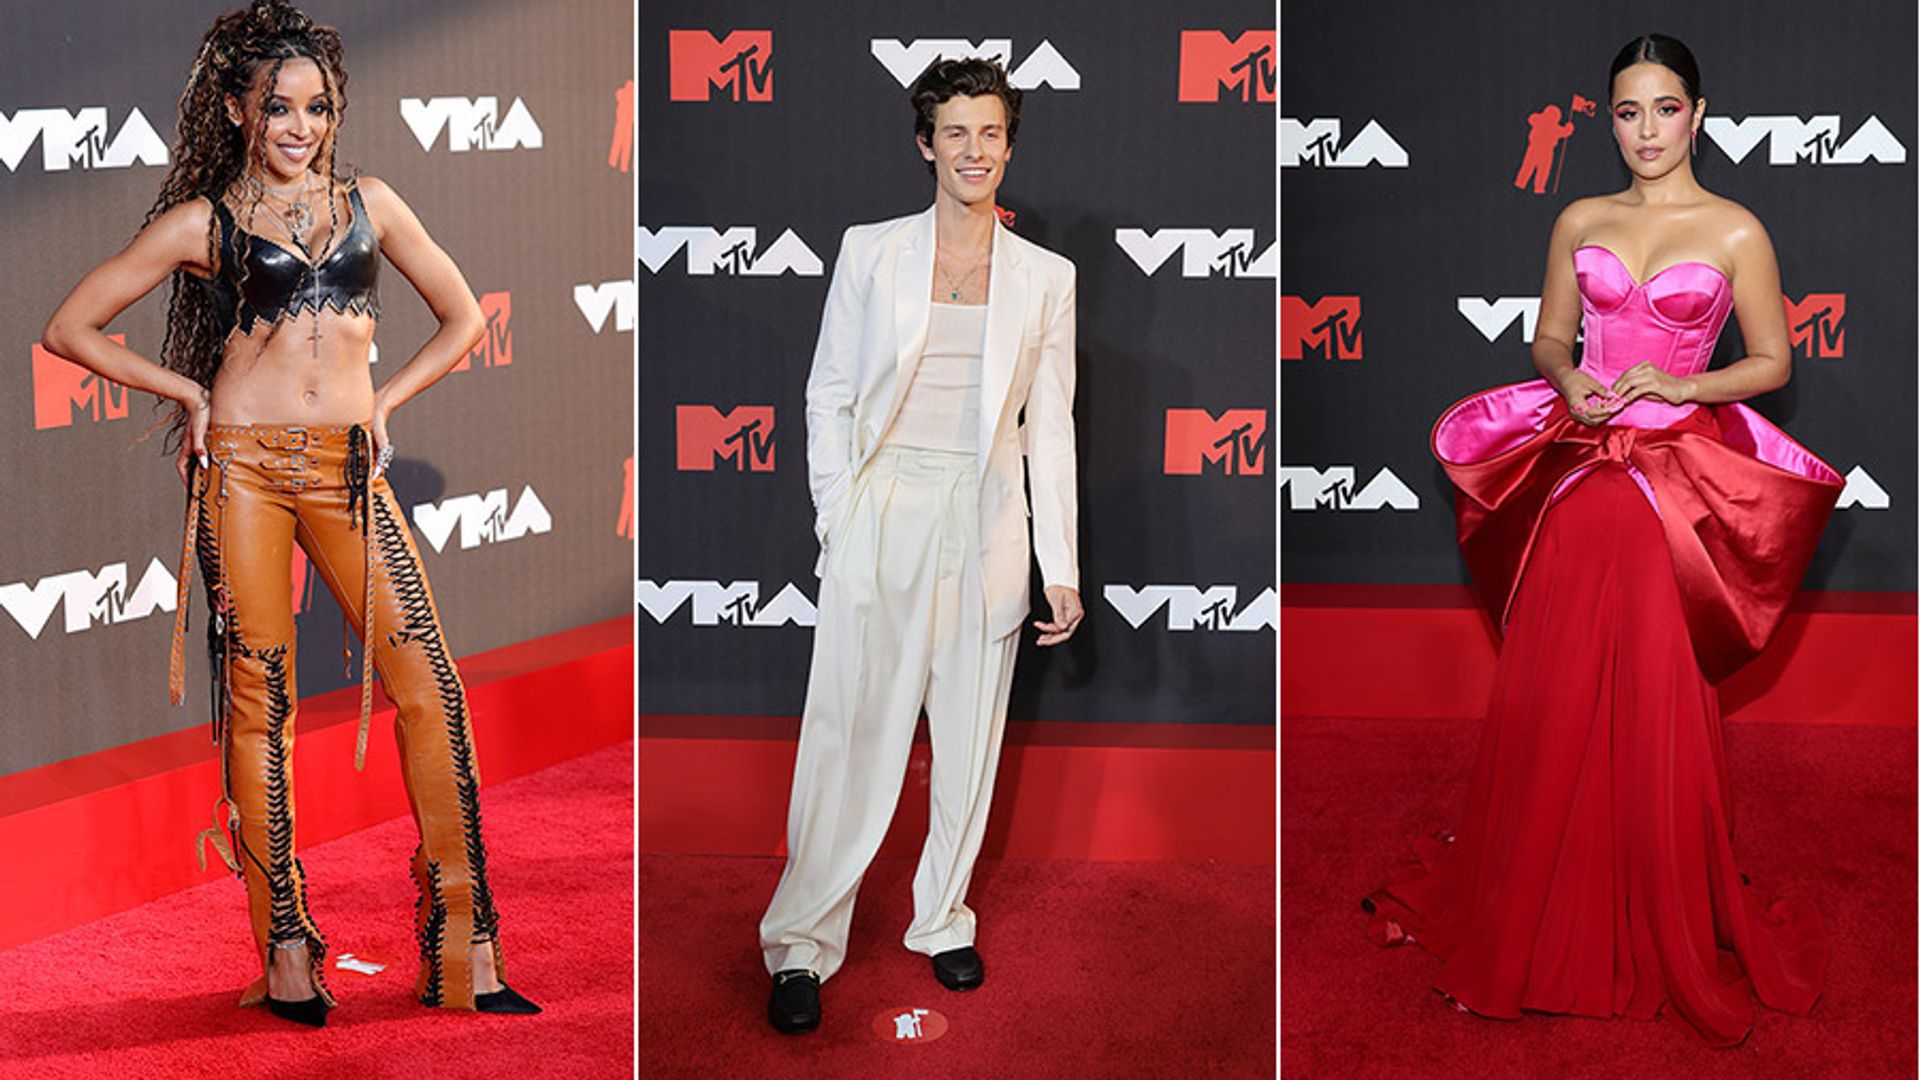 2021 MTV Video Music Awards: All the red carpet looks you need to see